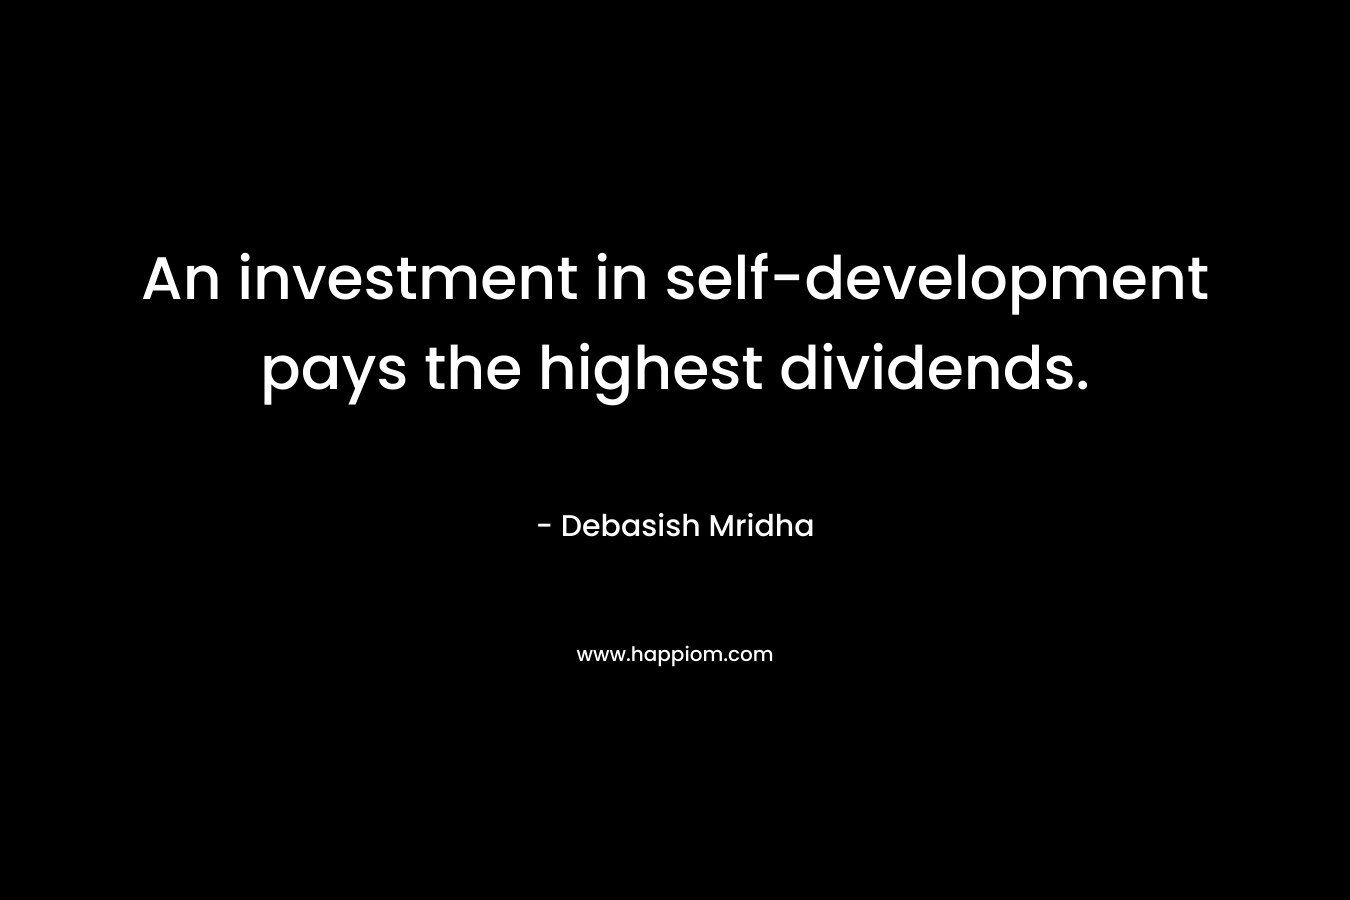 An investment in self-development pays the highest dividends. – Debasish Mridha